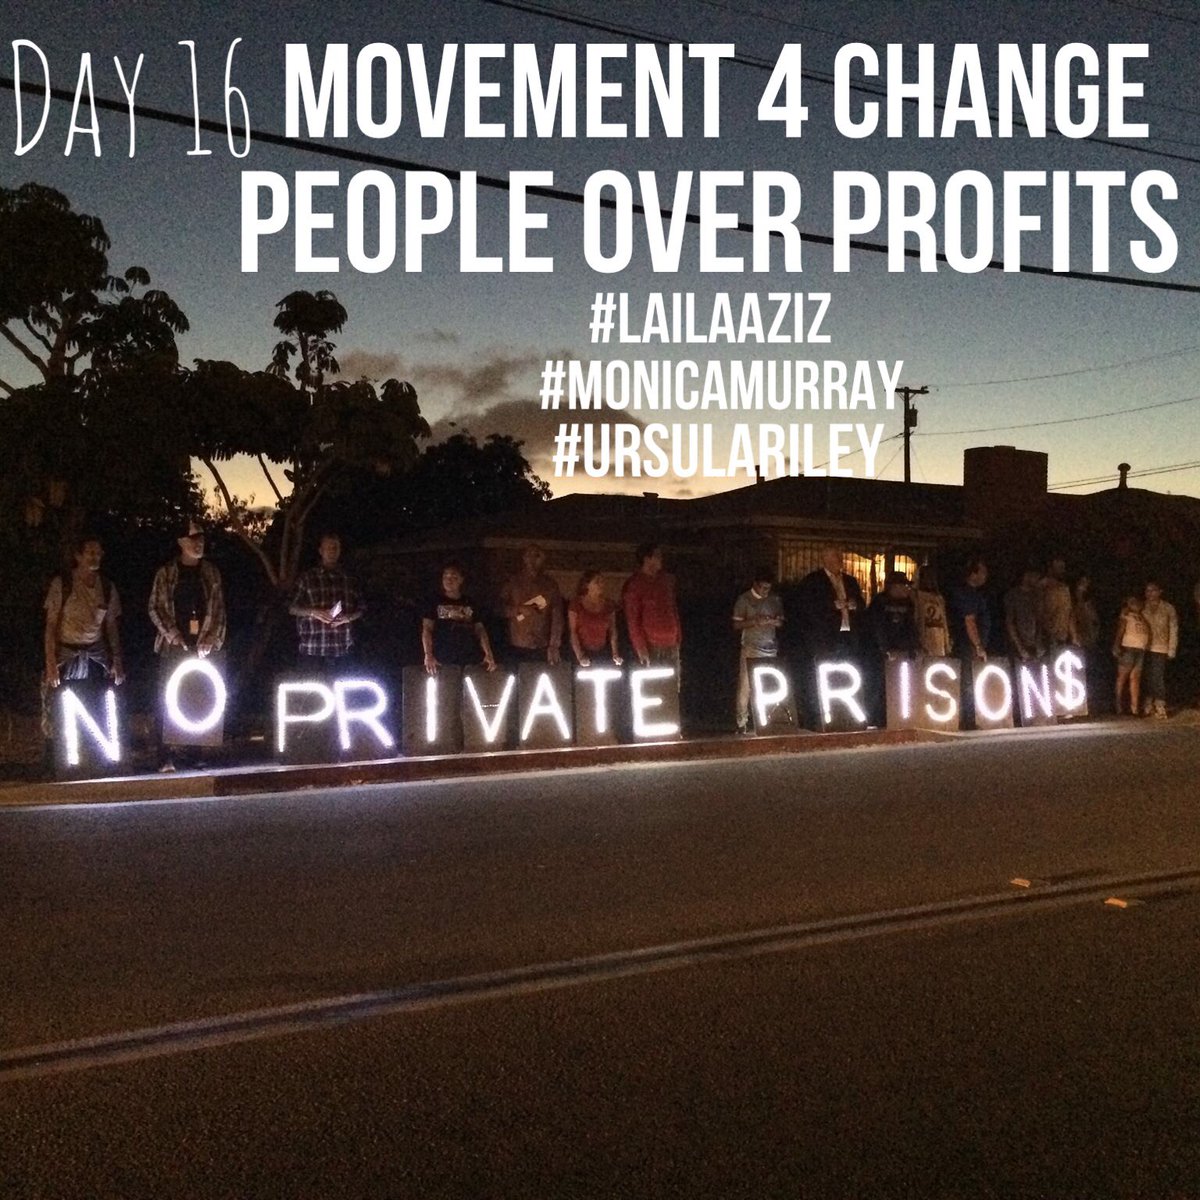 RT @REENTRYcrusader: Day 16 and we're still holding strong. The struggle/marathon continues! #banprivateprisons #peopleoverprofits https://…